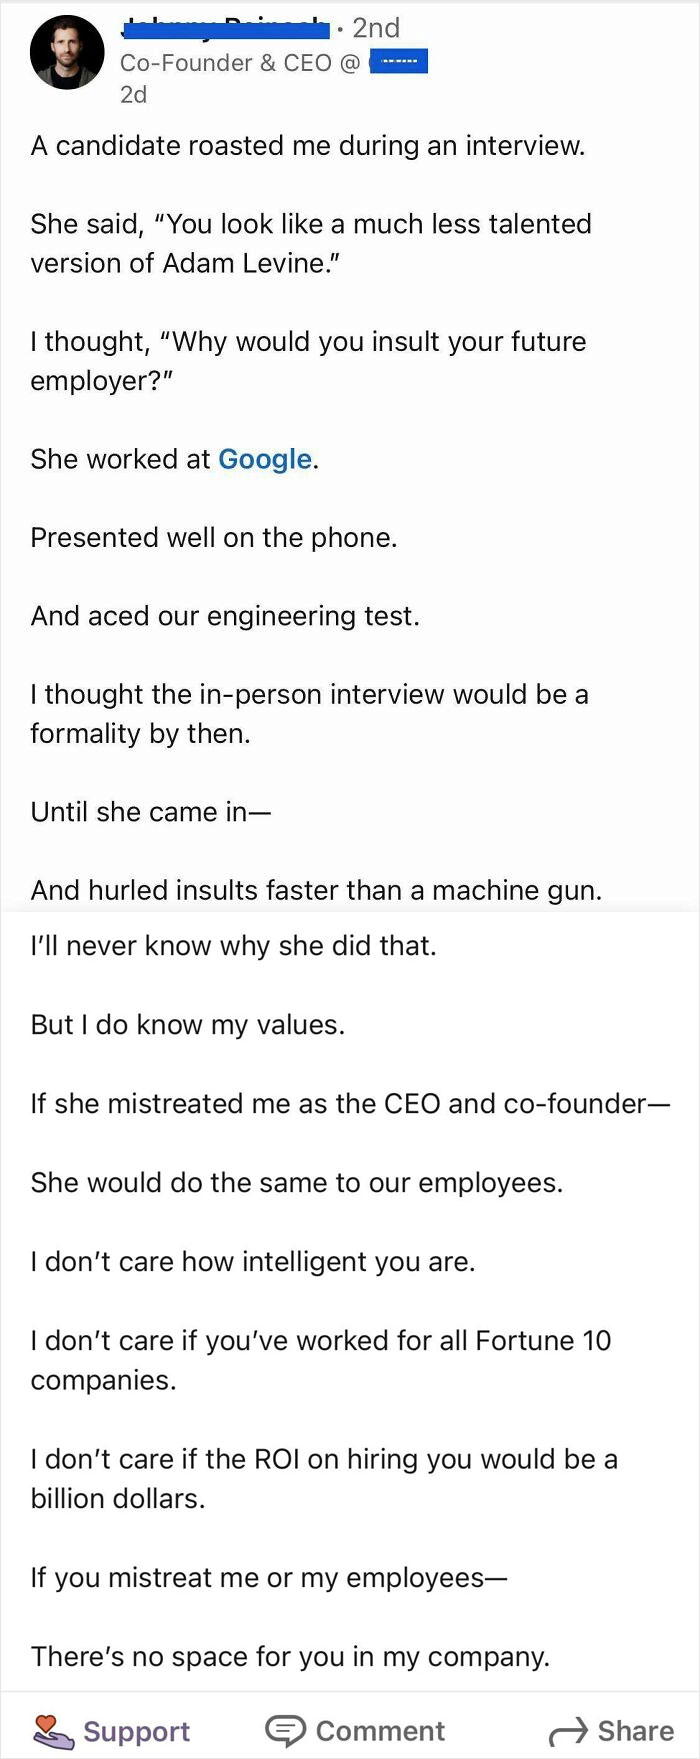 CEO Takes A Candidate’s Joke Wrong, Gives Speech About It Online